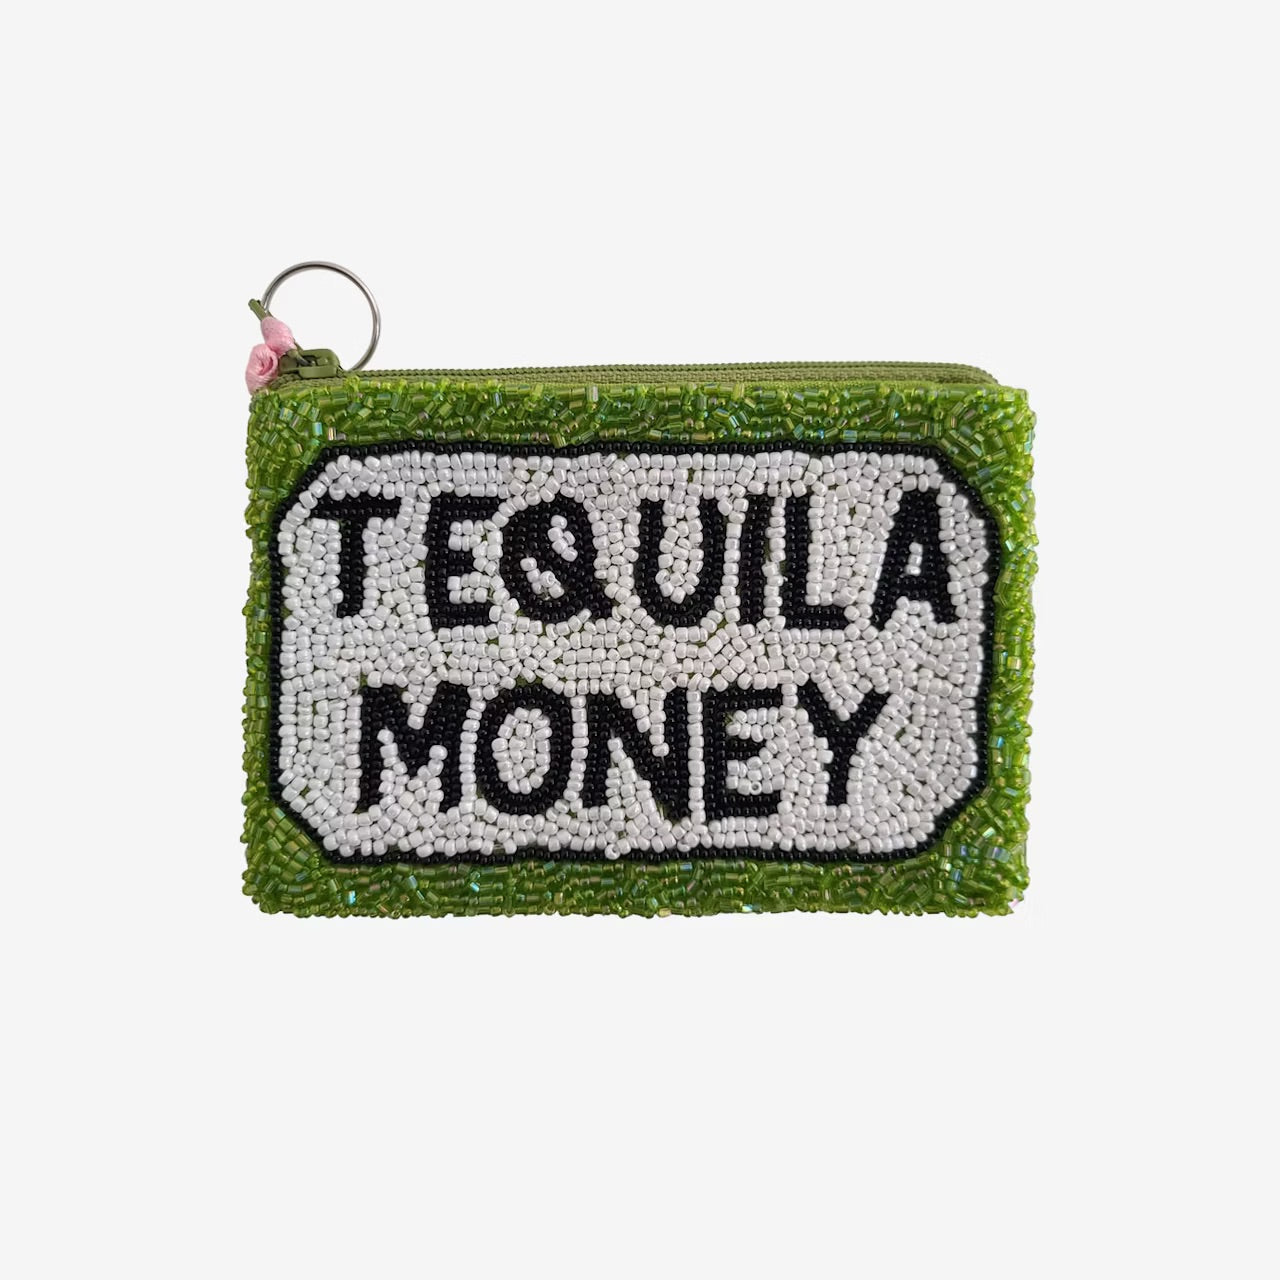 Shop Tiana Designs Hand Beaded Tequila Money Coin Purse Online